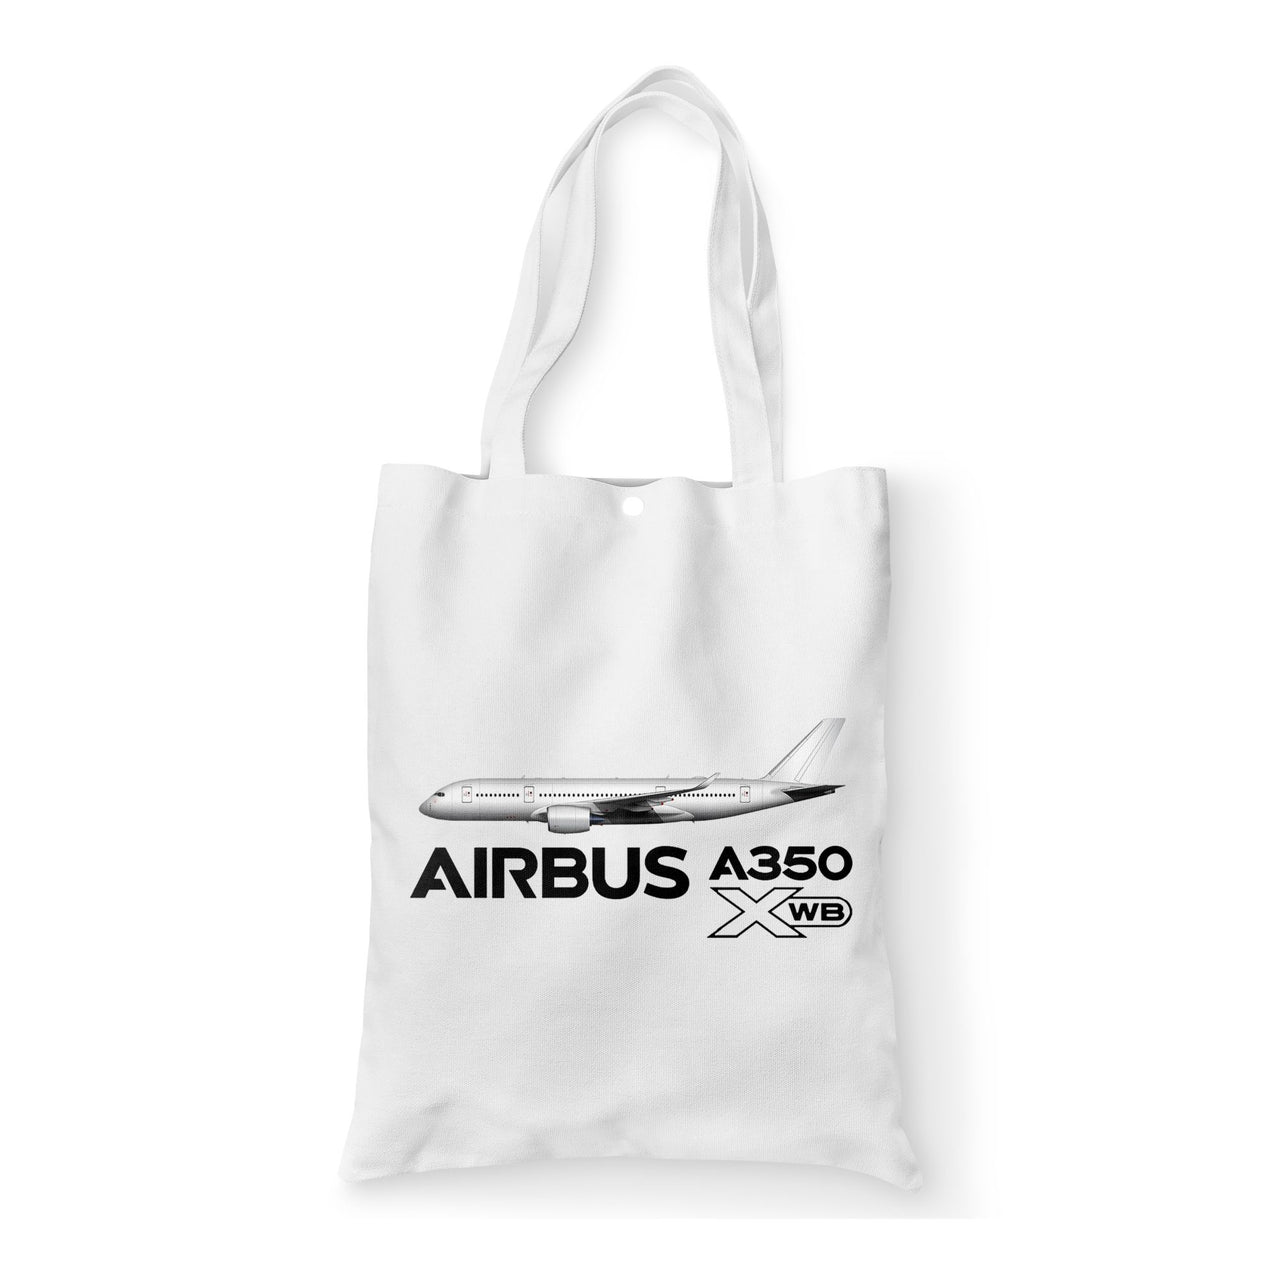 The Airbus A350 WXB Designed Tote Bags